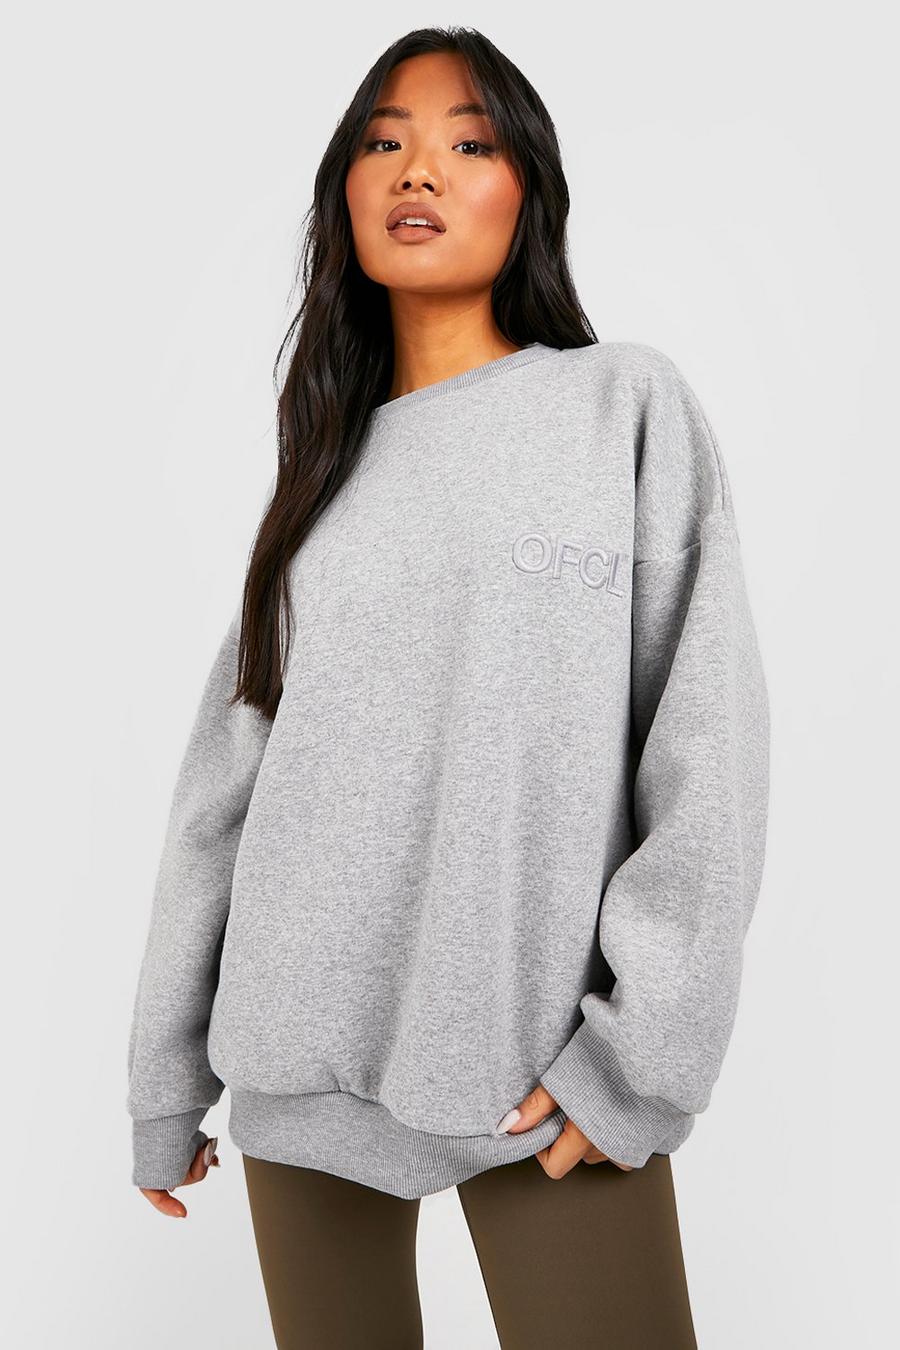 Grey Petite Ofcl Embroidered Sweatshirt